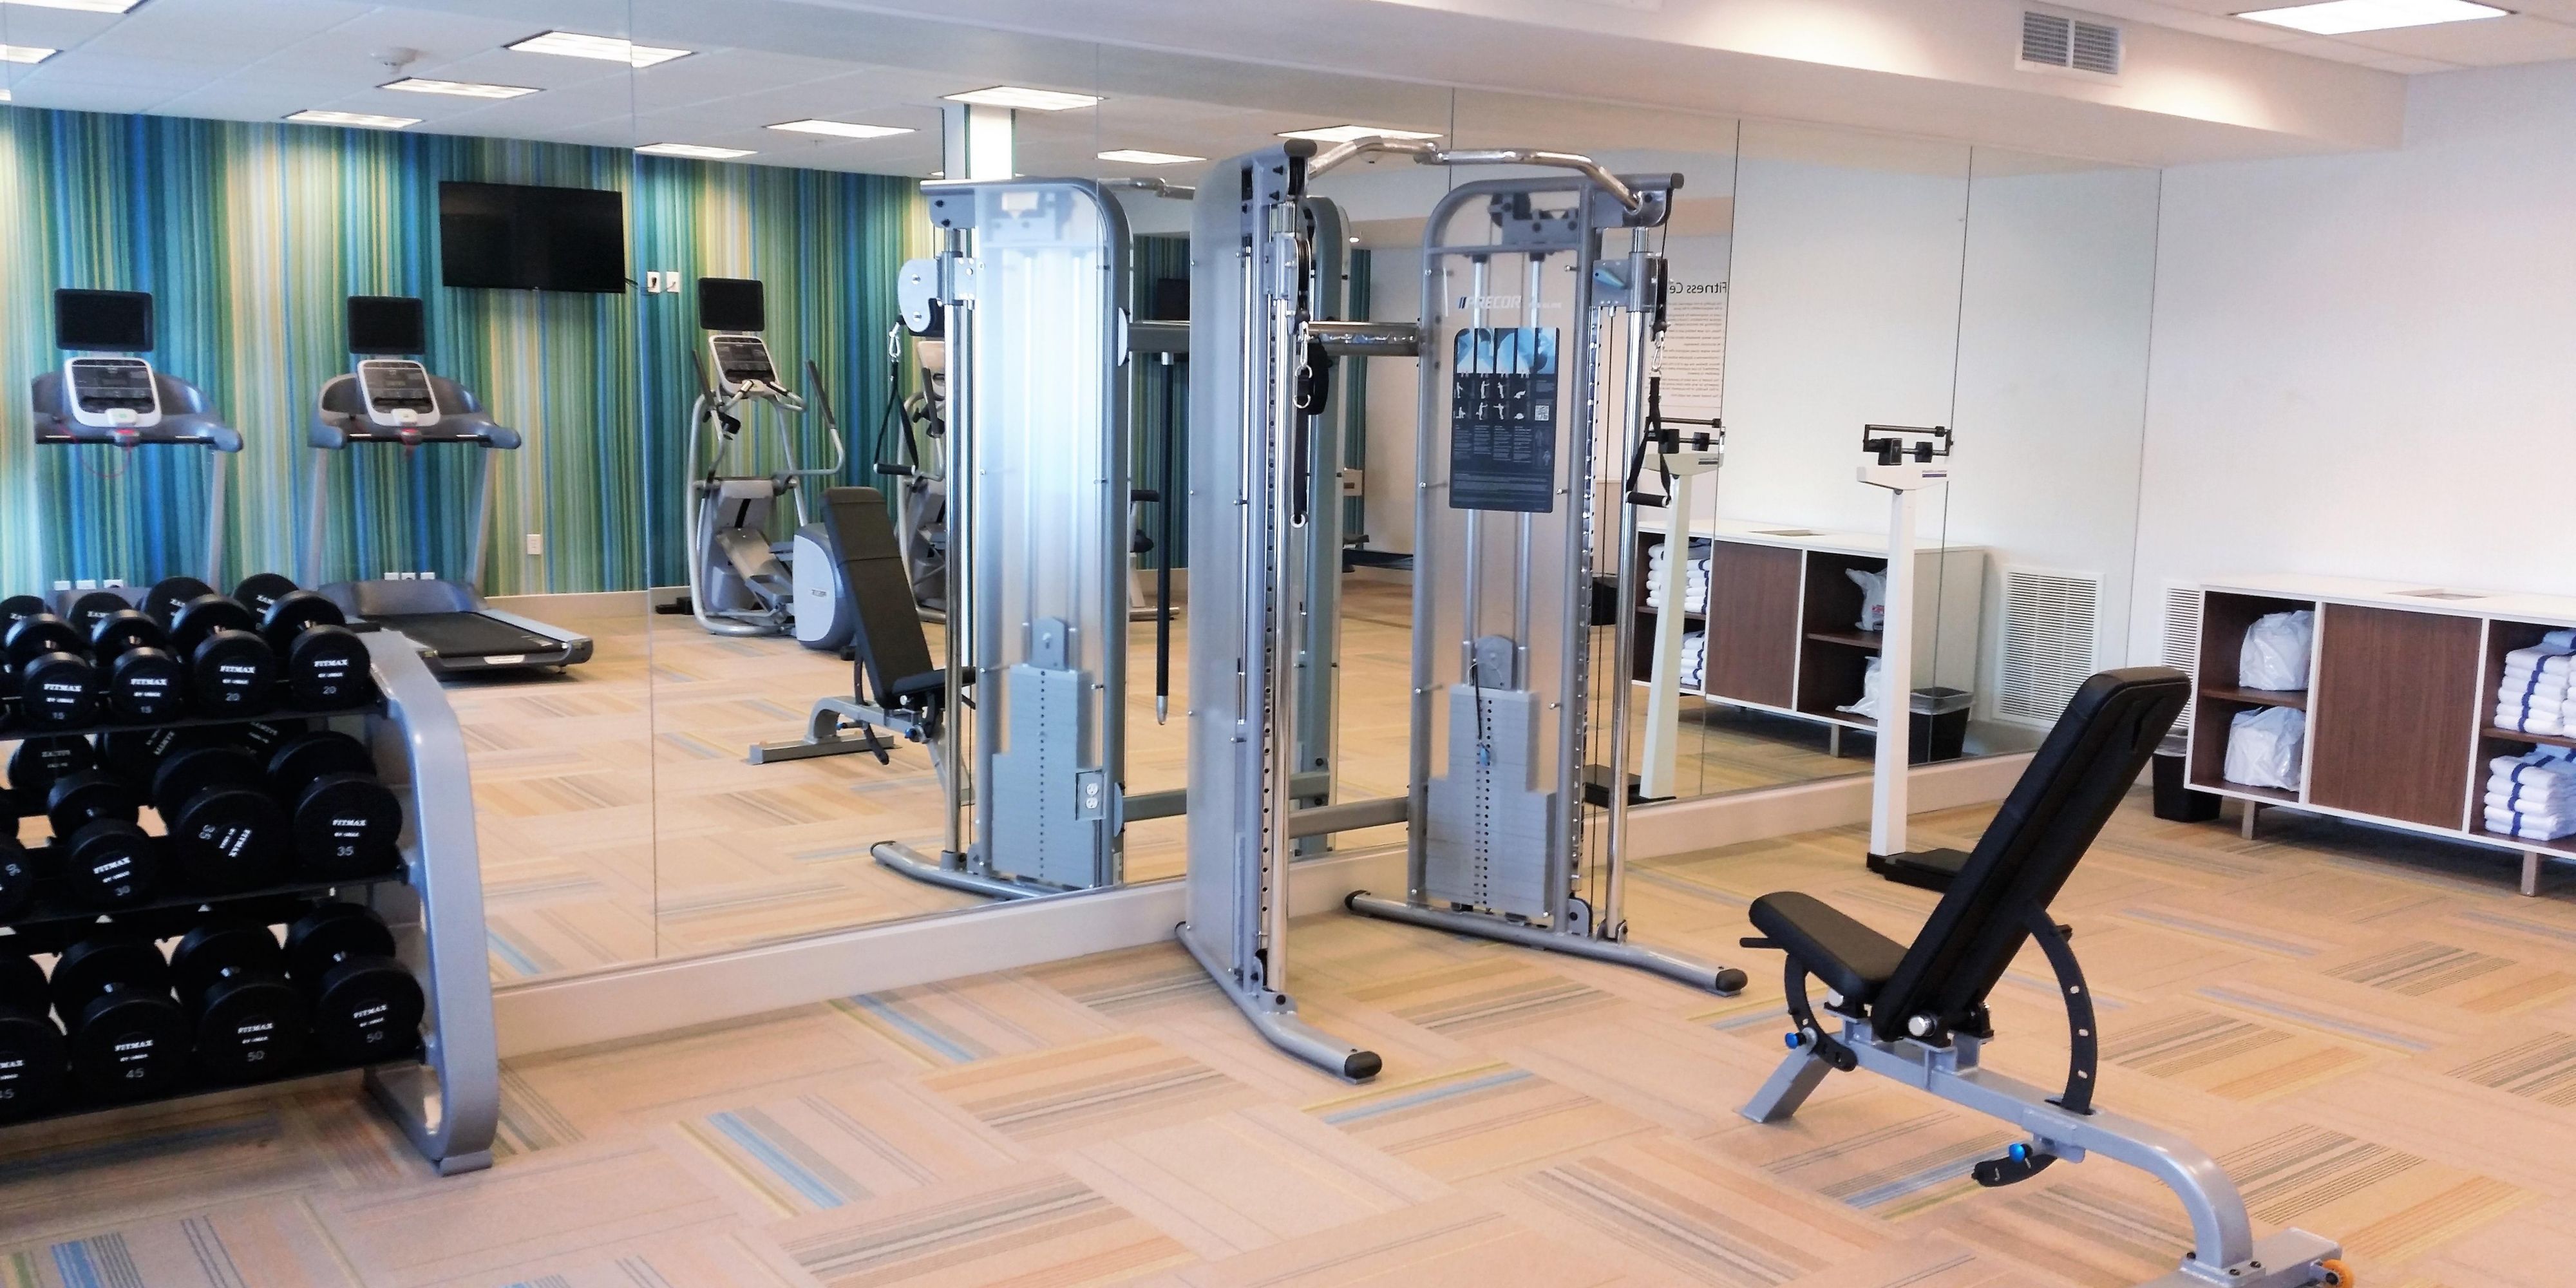 Work out in our fitness center. Open 24/7 